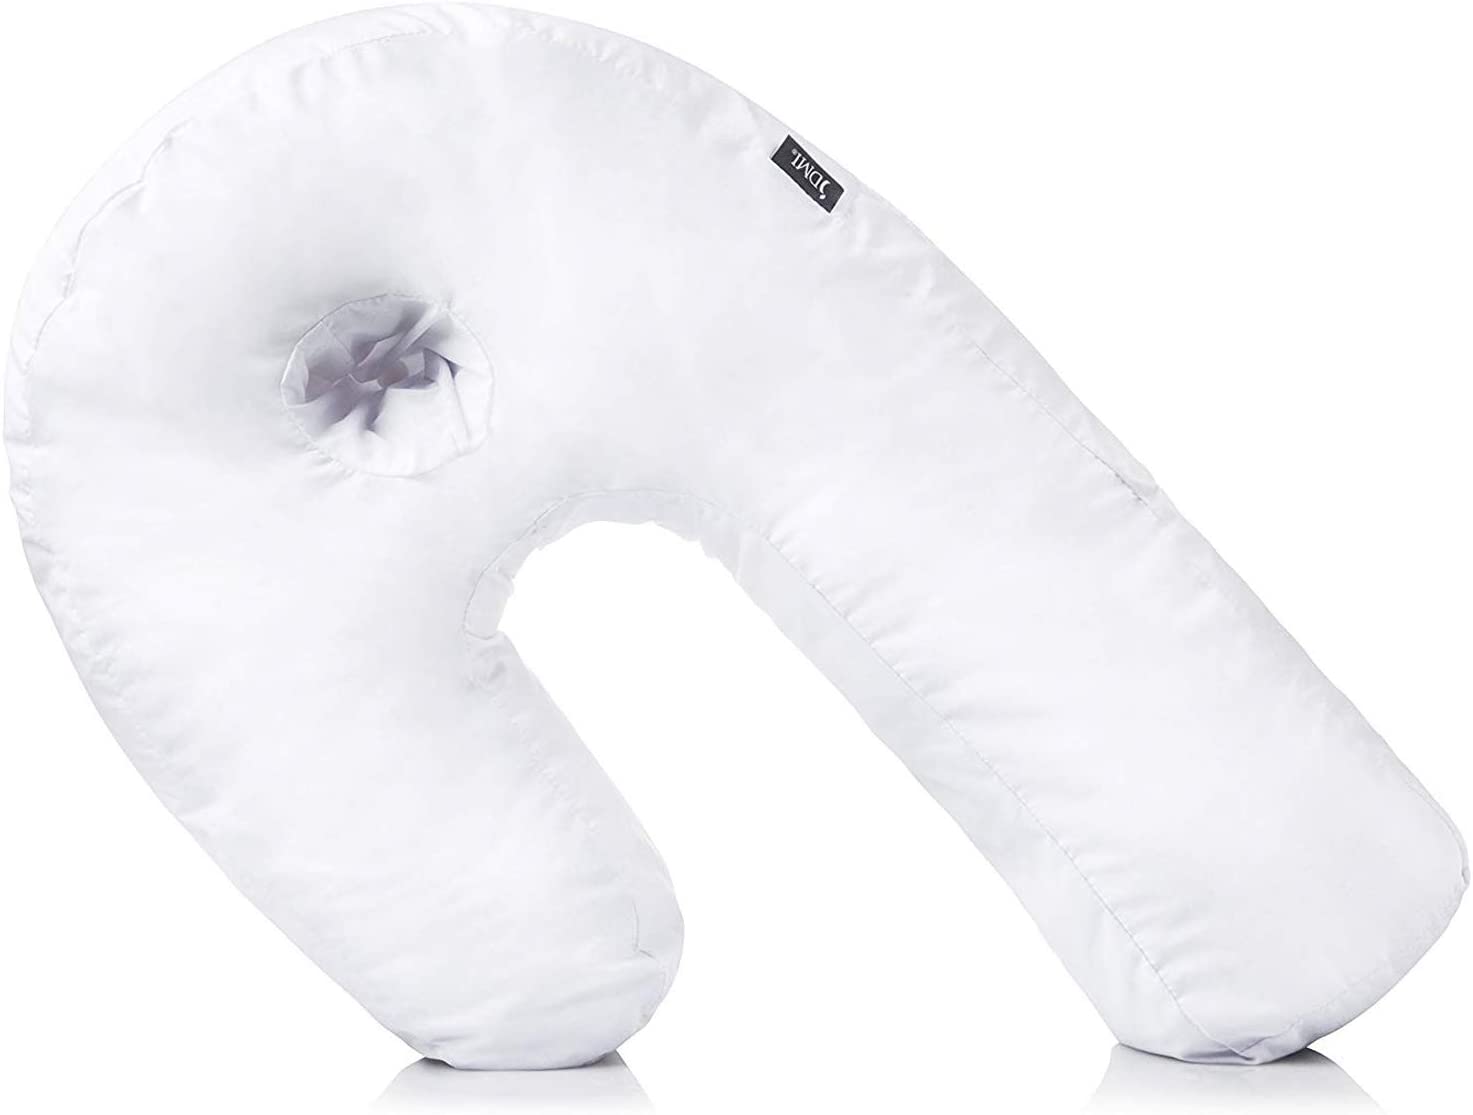 Duro-Med DMI Side Sleeper Body Pillow with Contoured Support